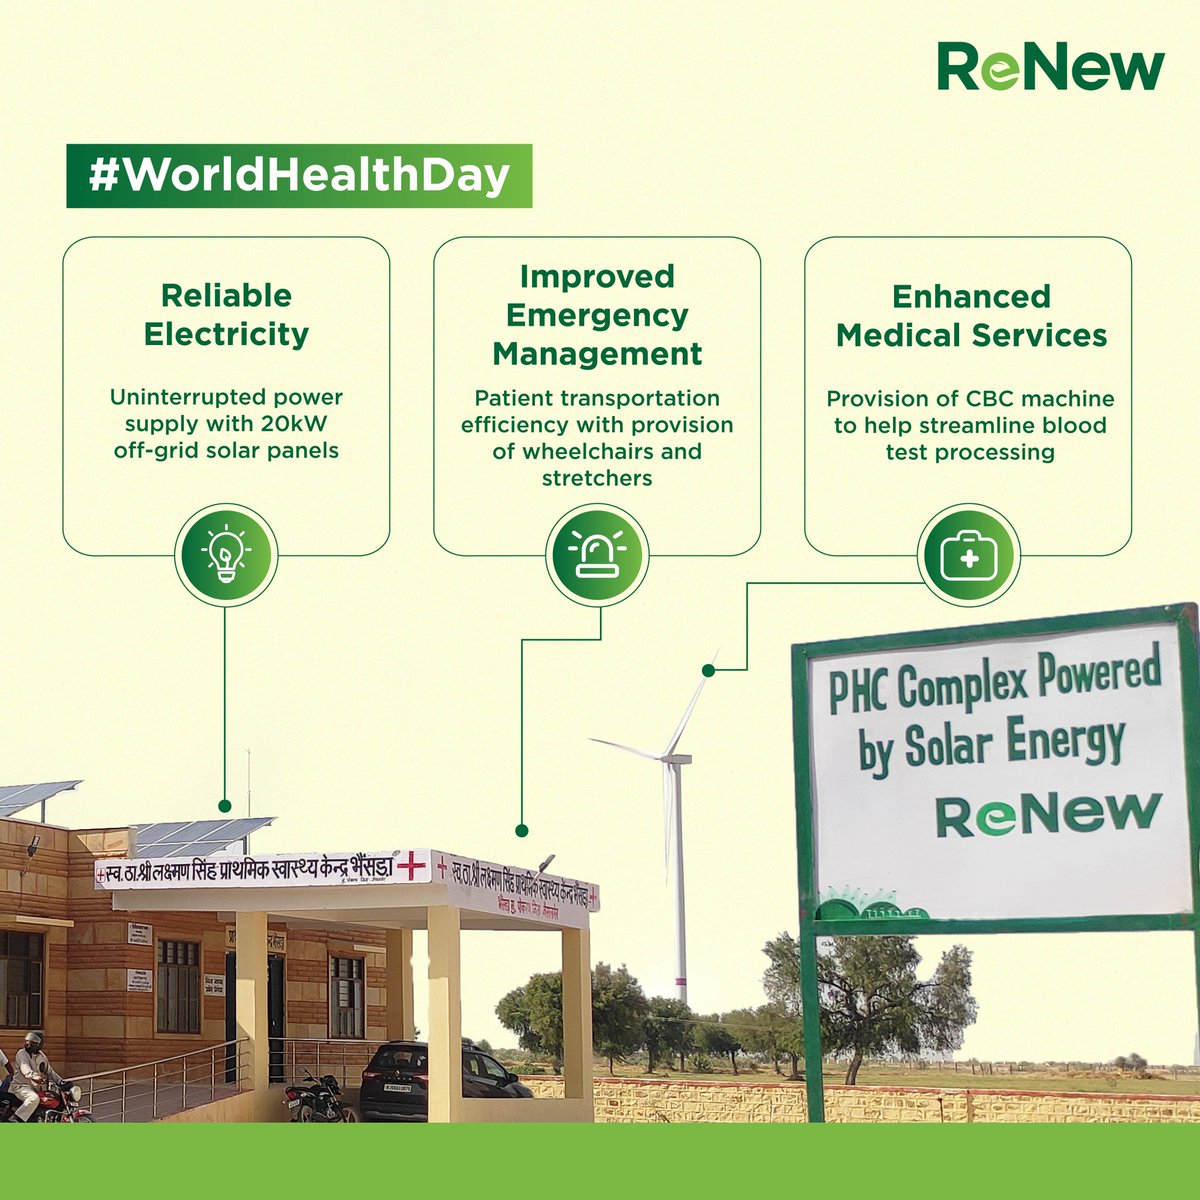 The primary health centre at Bhainsada, Jaisalmer—supported by ReNew—provides medical facilities to 3,000+ people every month, serving villages within a 20 km radius. Affordability and accessibility are critical to bringing healthcare within reach of those who need it the most.…